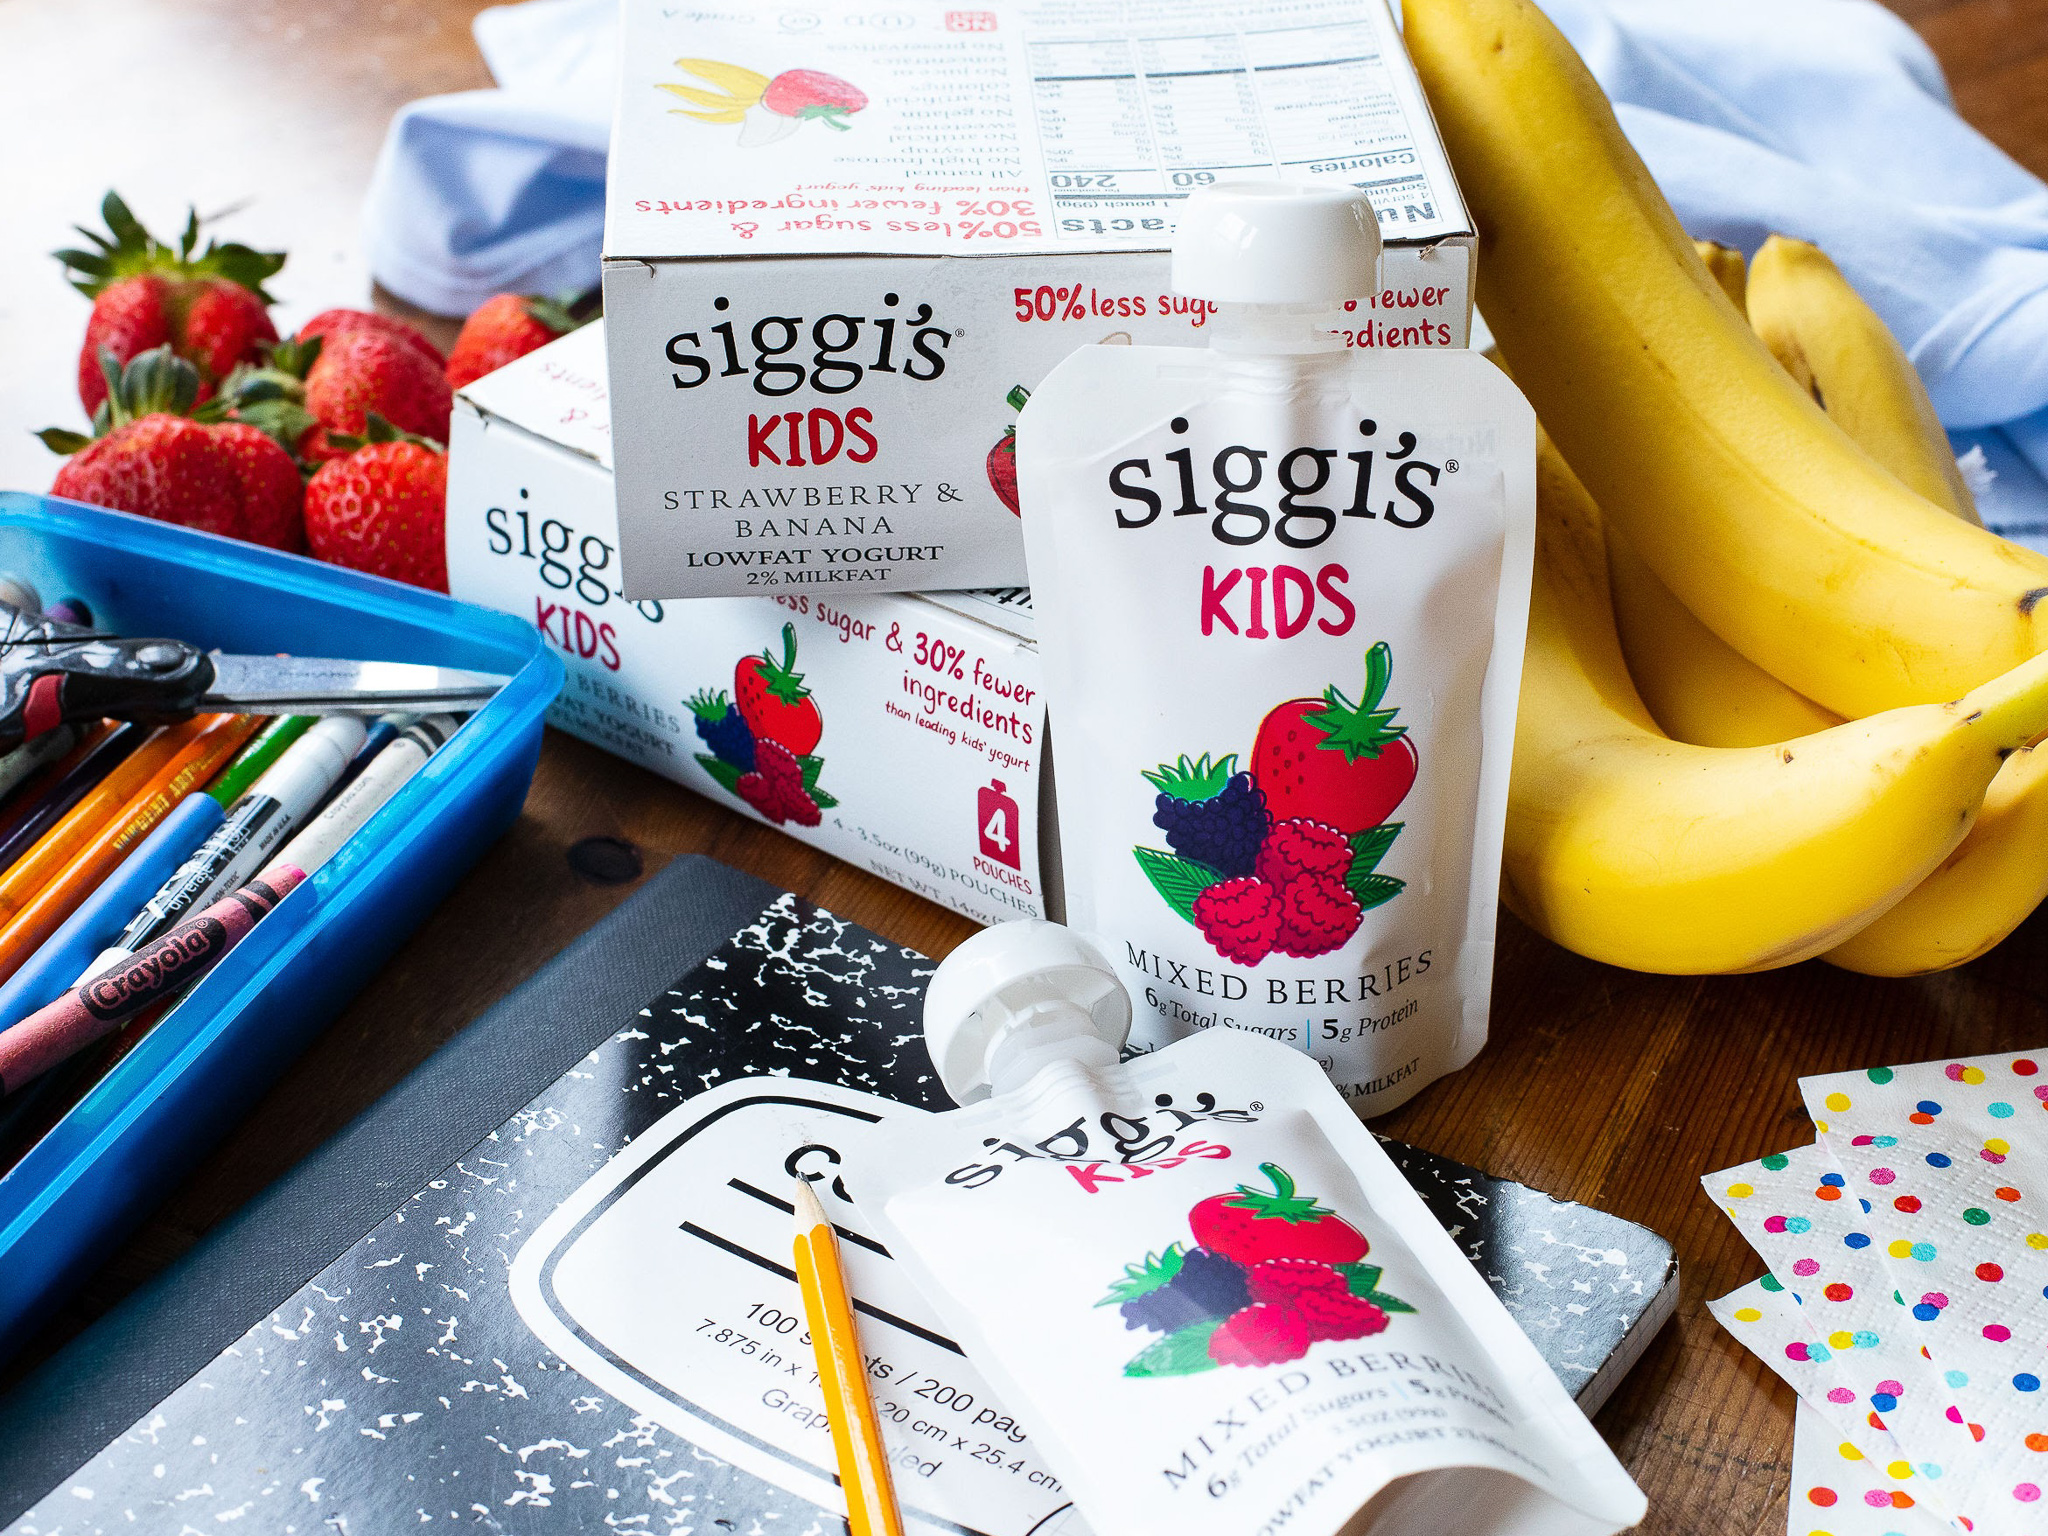 siggi's Icelandic Style Skyr Is BOGO At Publix - Perfect Time To Stock Up! on I Heart Publix